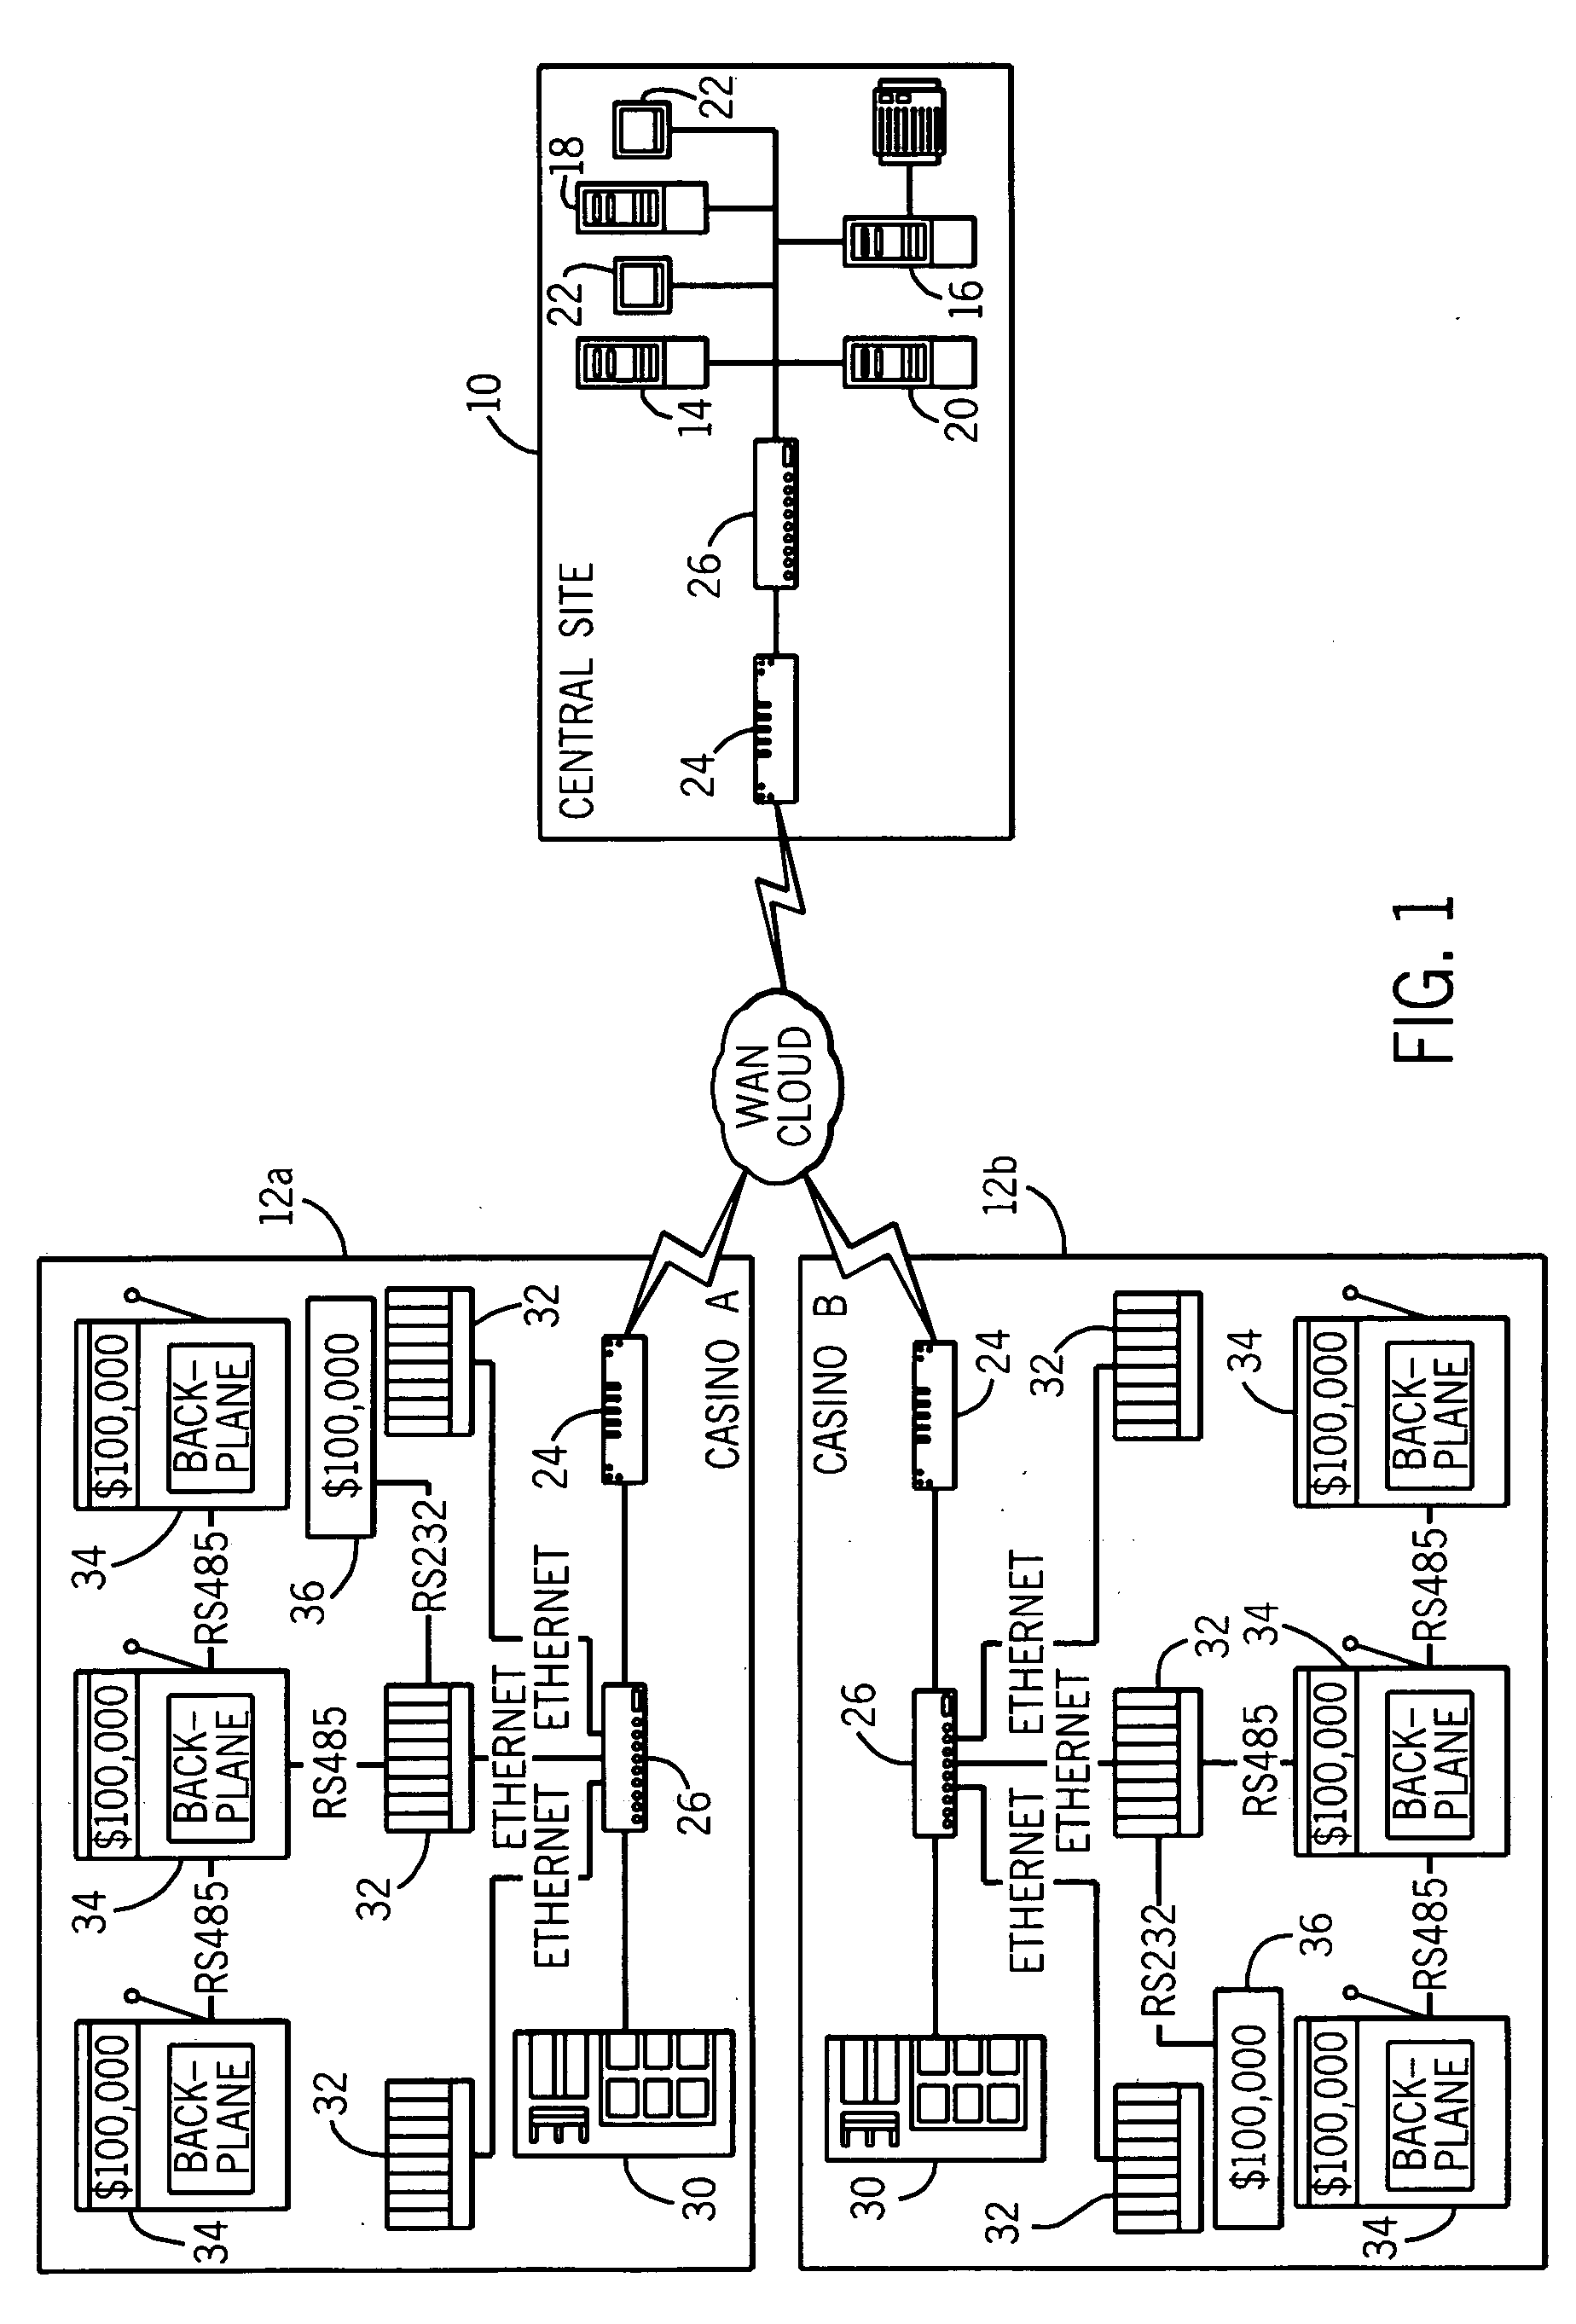 Dynamic configuration of gaming system